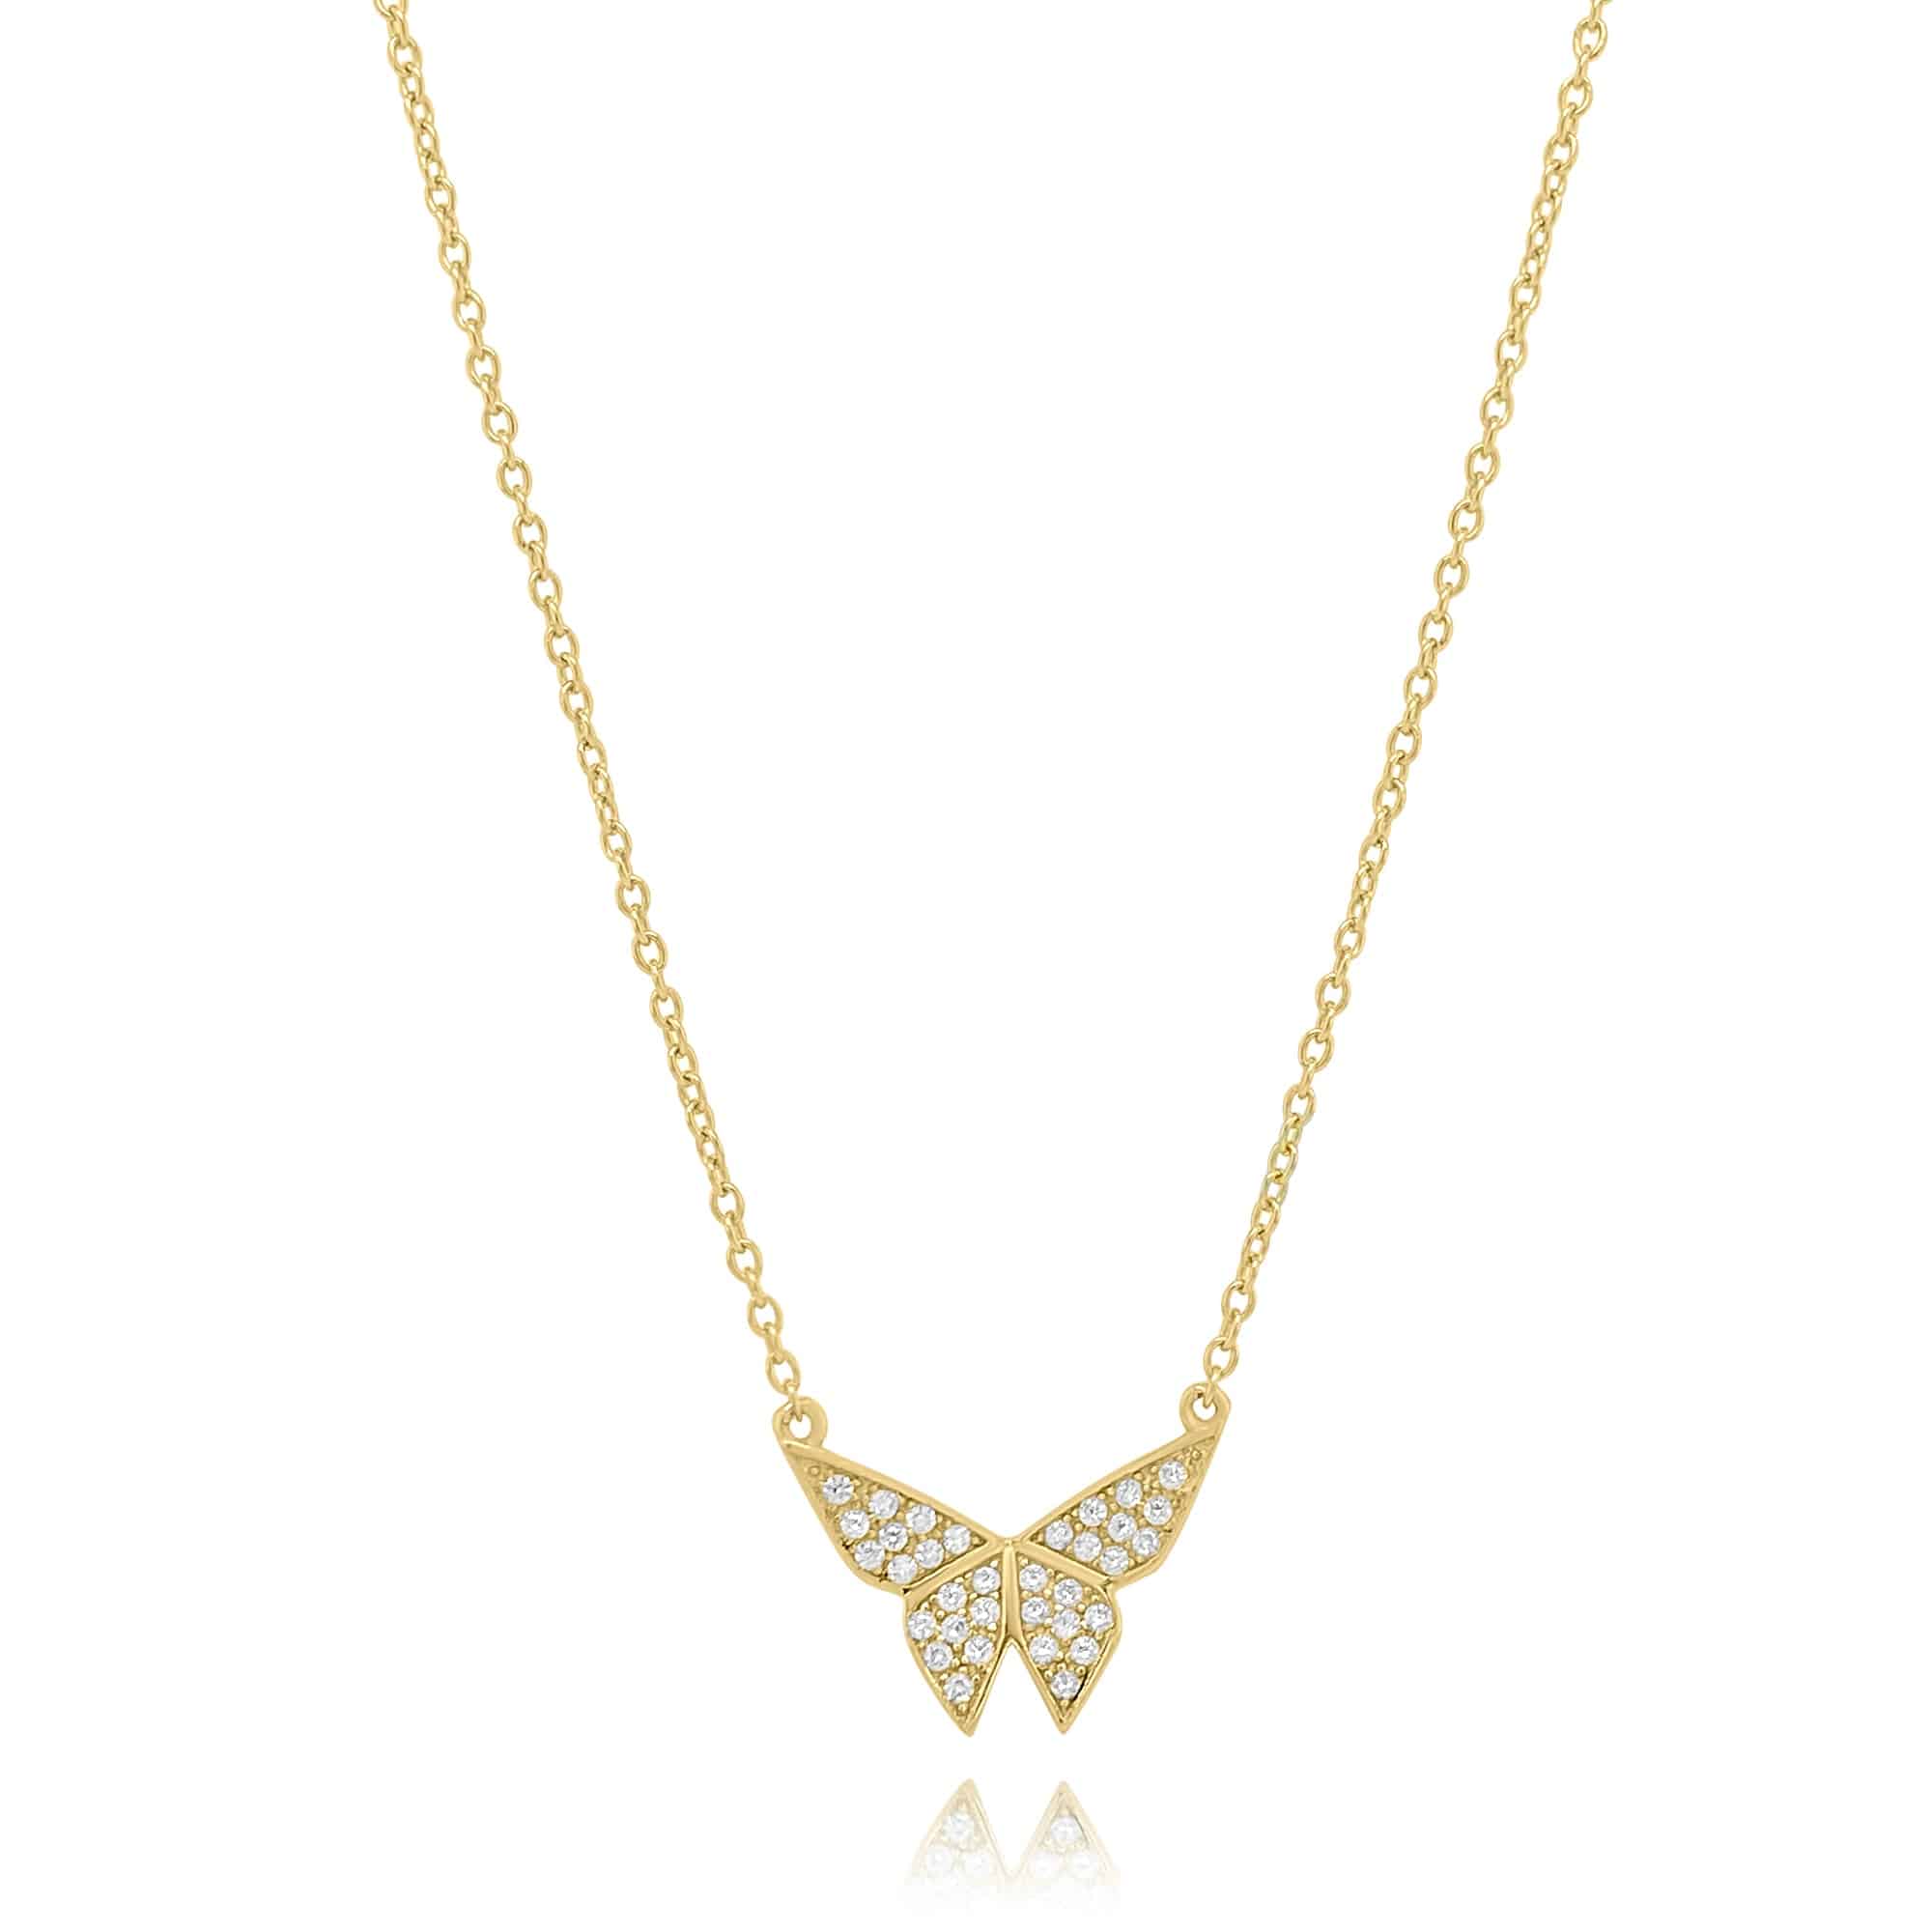 BUTTERFLY NECKLACE - Trove & Co.